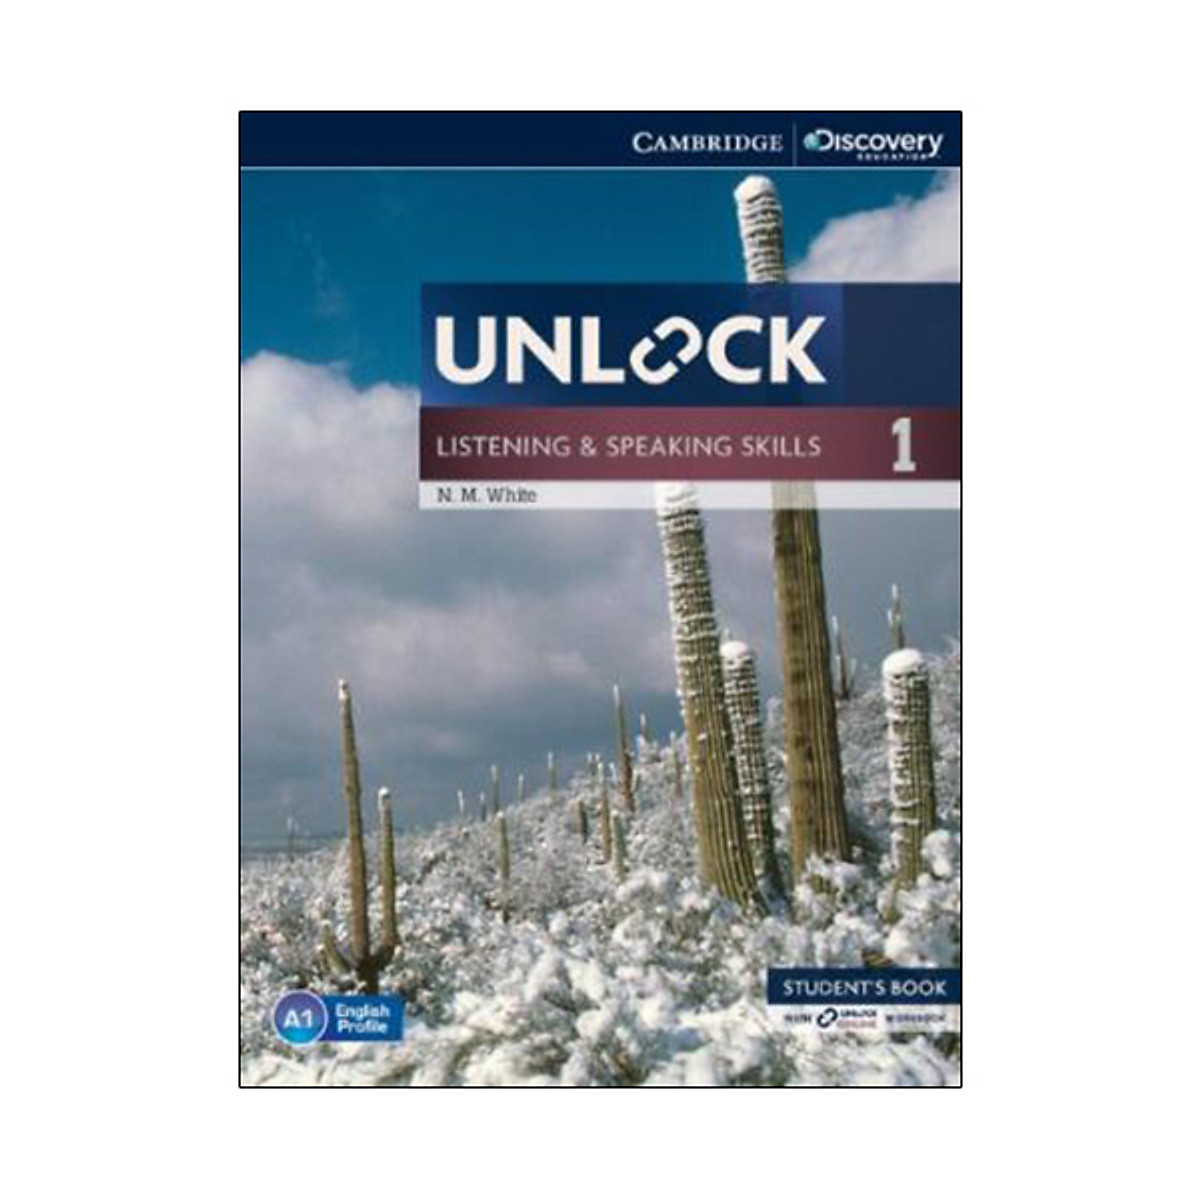 Unlock Level 1 Listening and Speaking Skills Student's Book and Online Workbook: Level 1